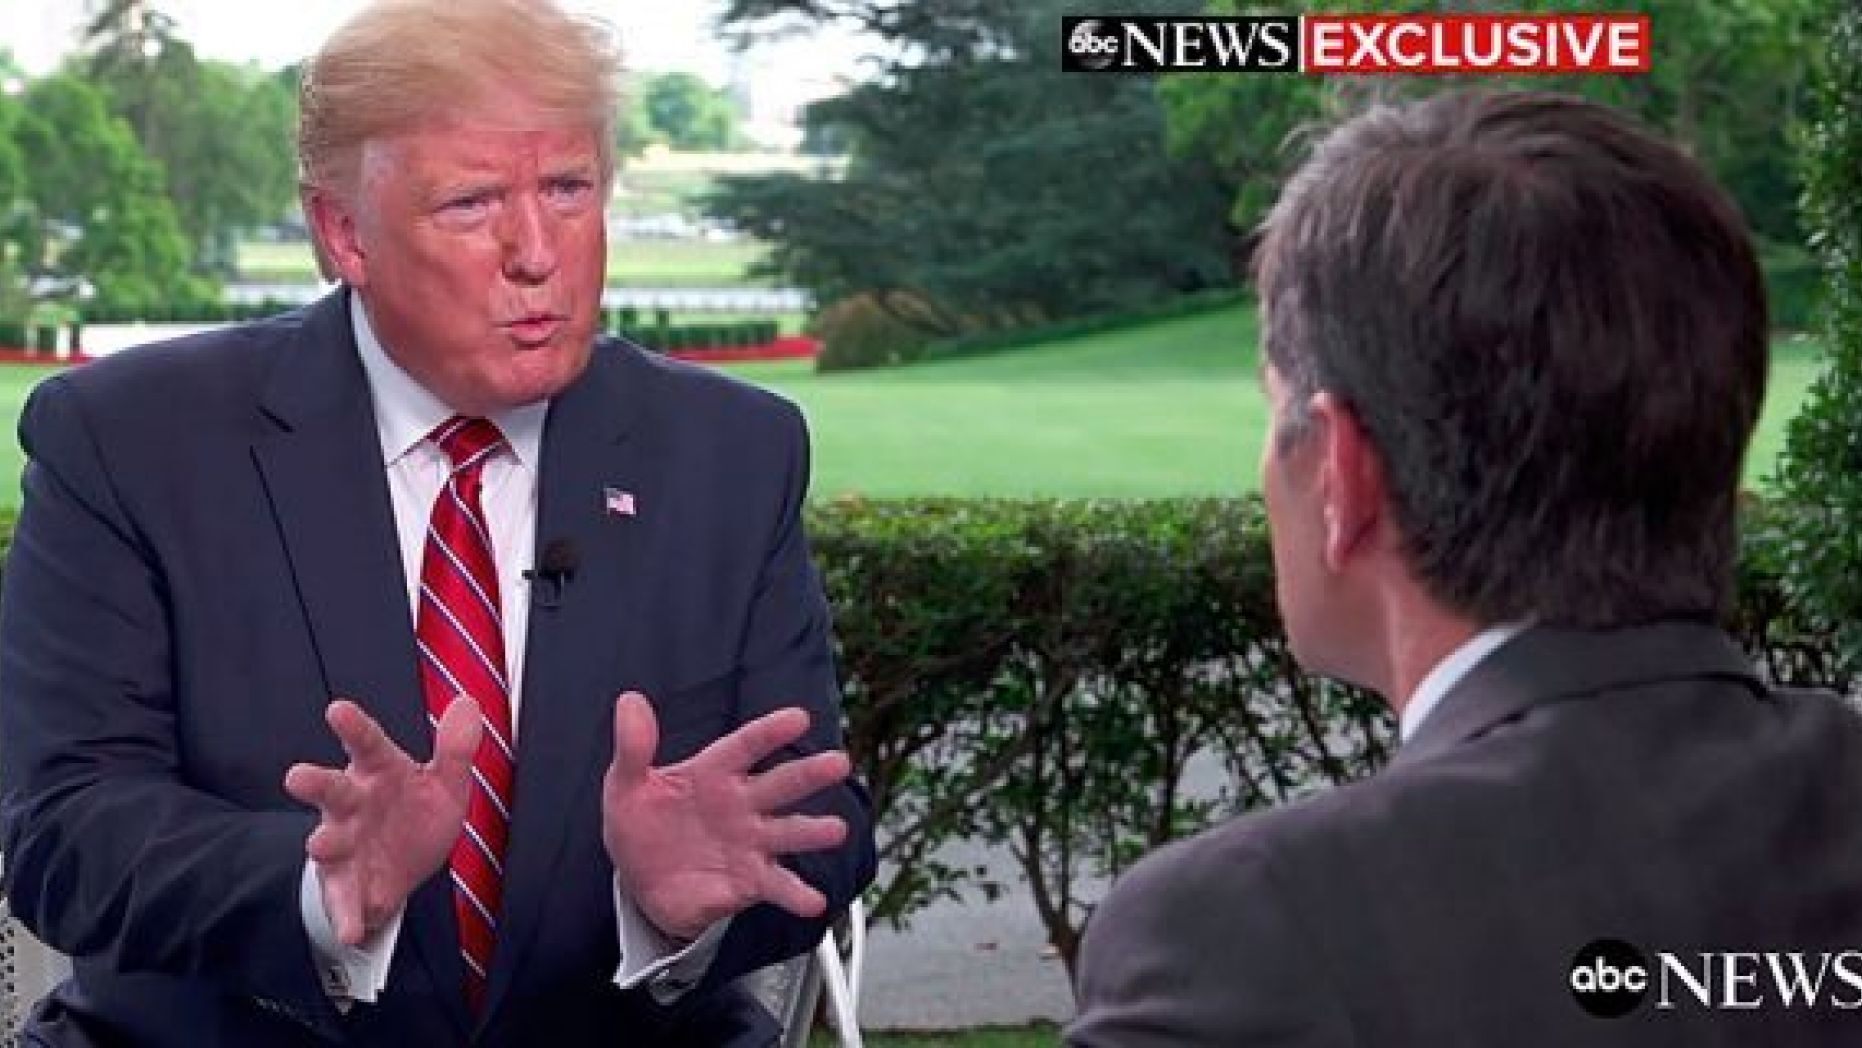 George Stephanopoulos’ heavily promoted Sunday night interview with President Trump attracted 3.91 million viewers.